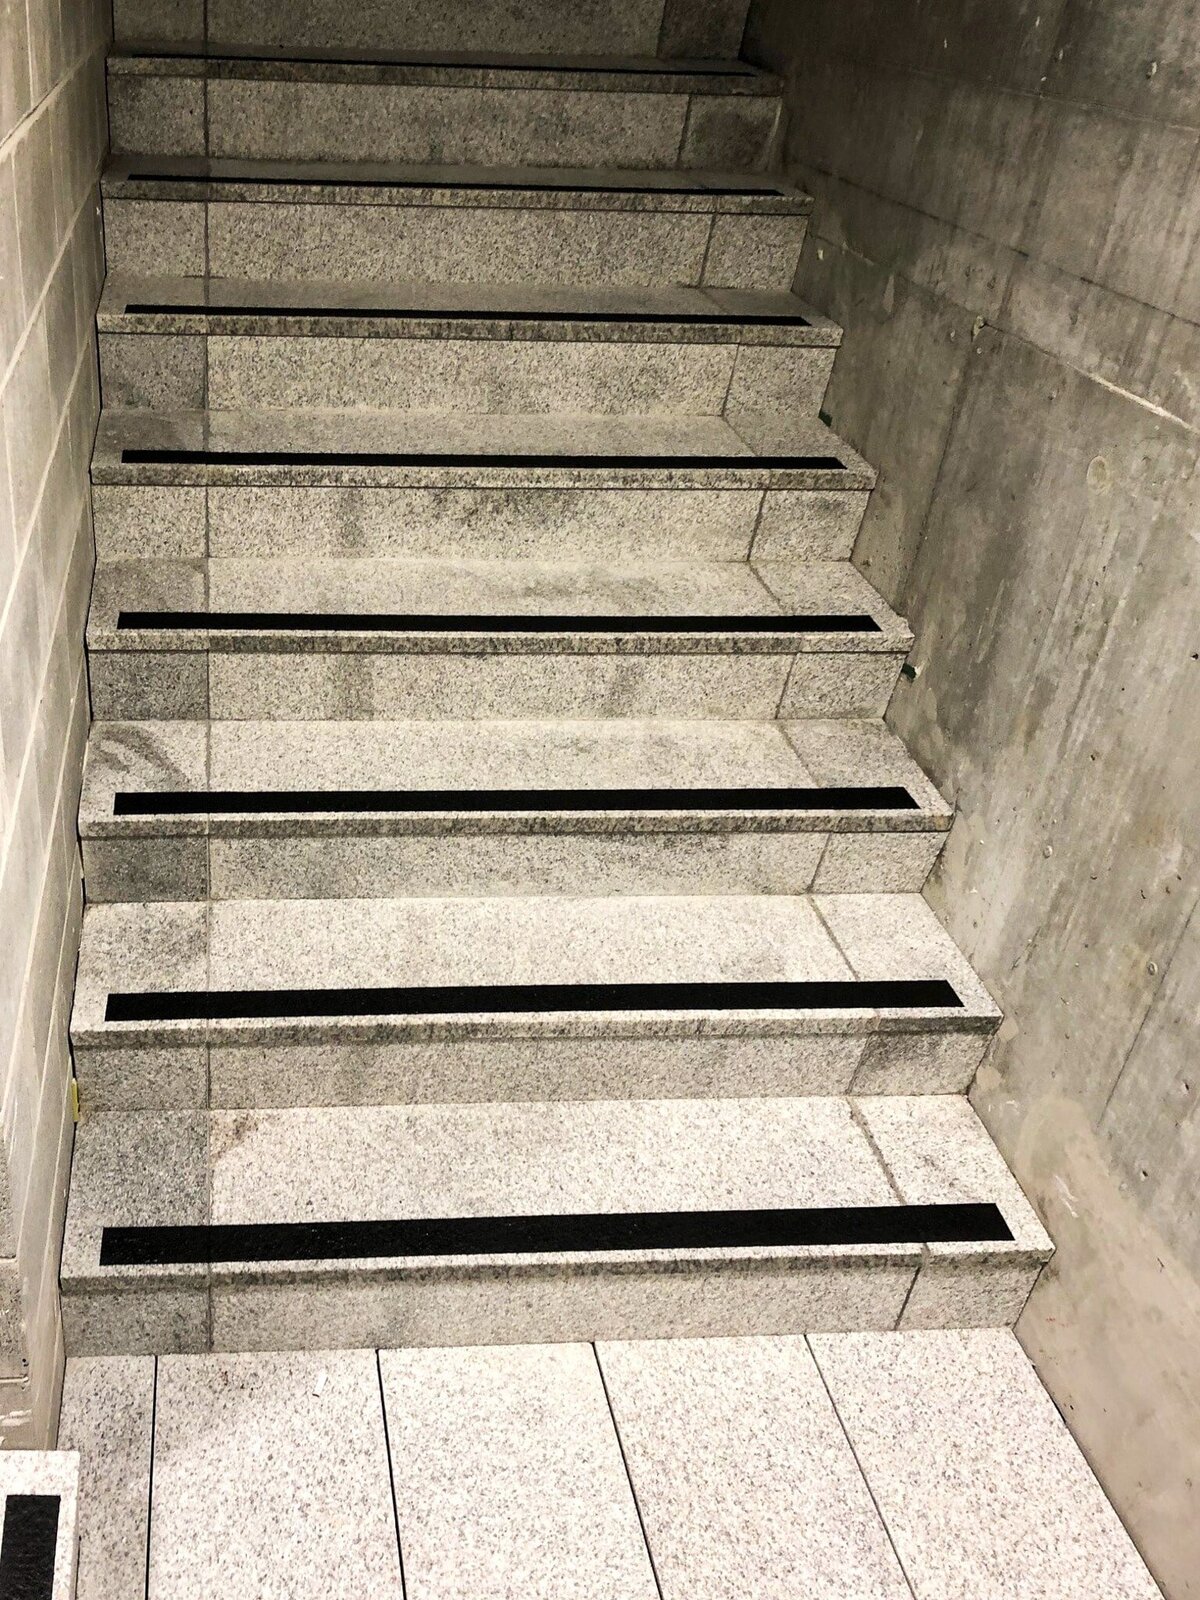 Stair treads applied to stairs